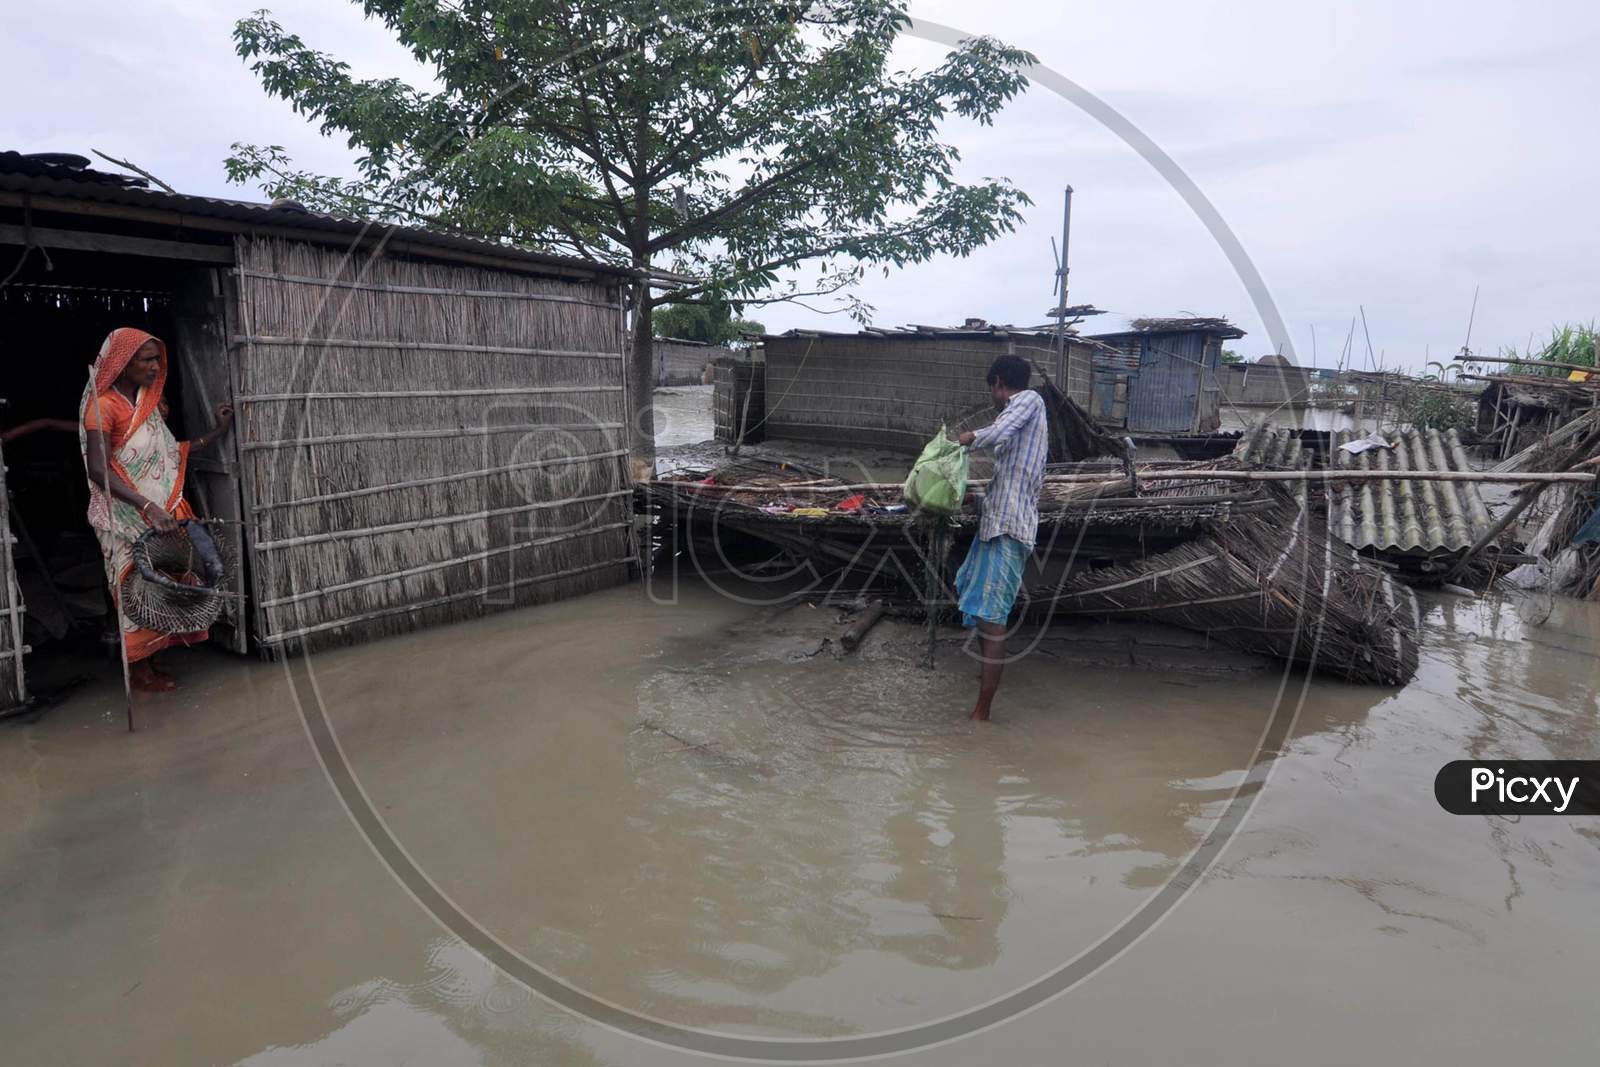 Villagers try to rebuild their damaged huts during the flood in Darrang, Assam on July 21, 2020